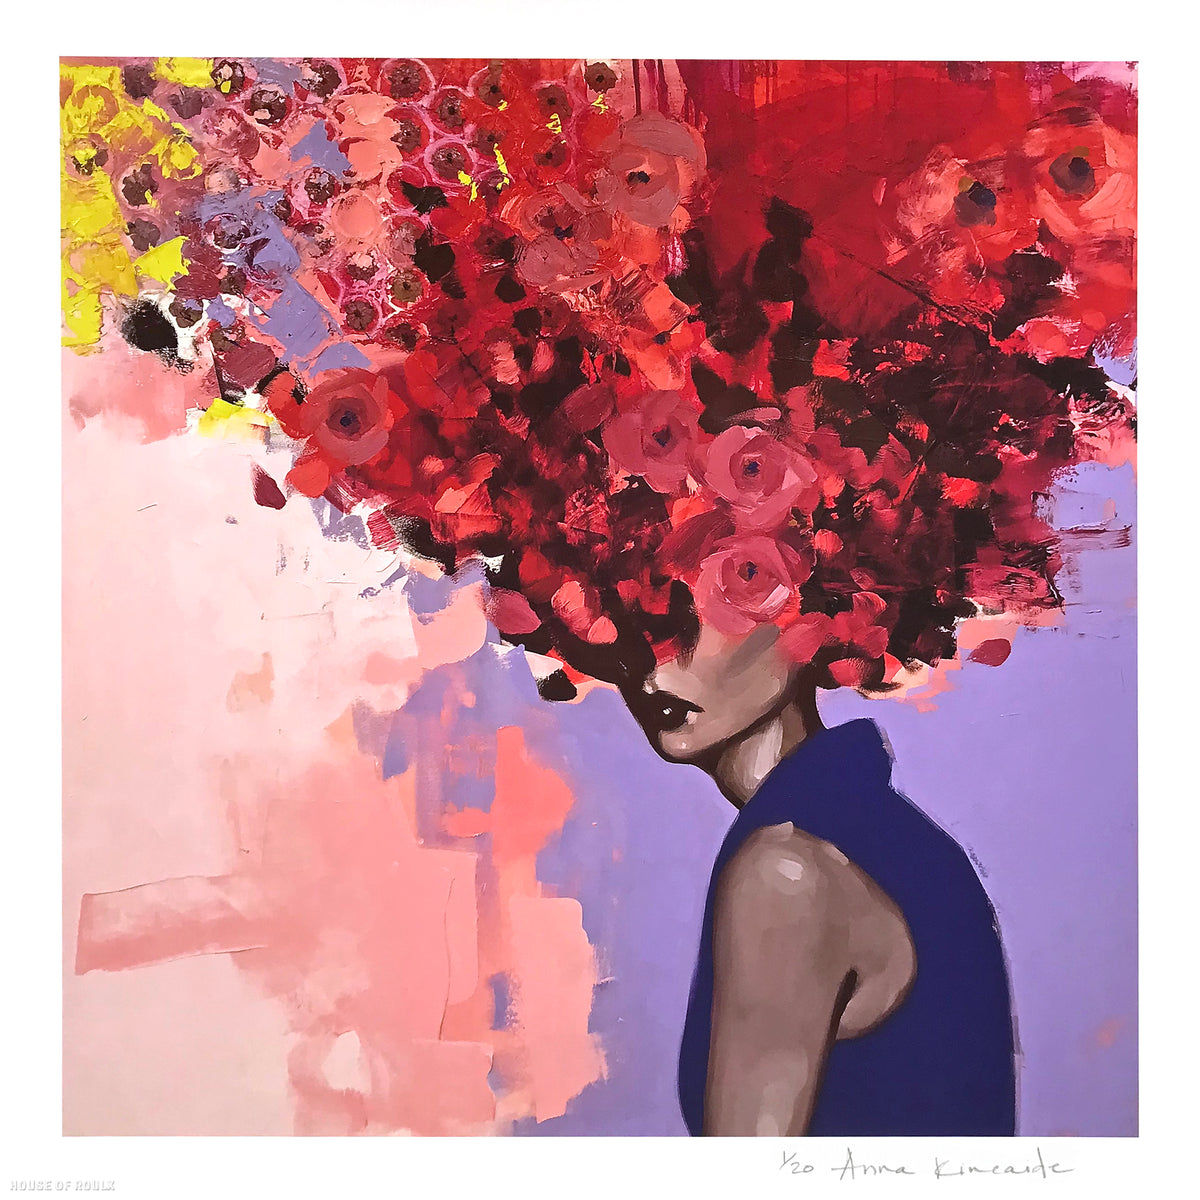 Anna Kincaide &quot;The Color of Love&quot; - Archival Print, Limited Edition of 20 - 18 x 18&quot;